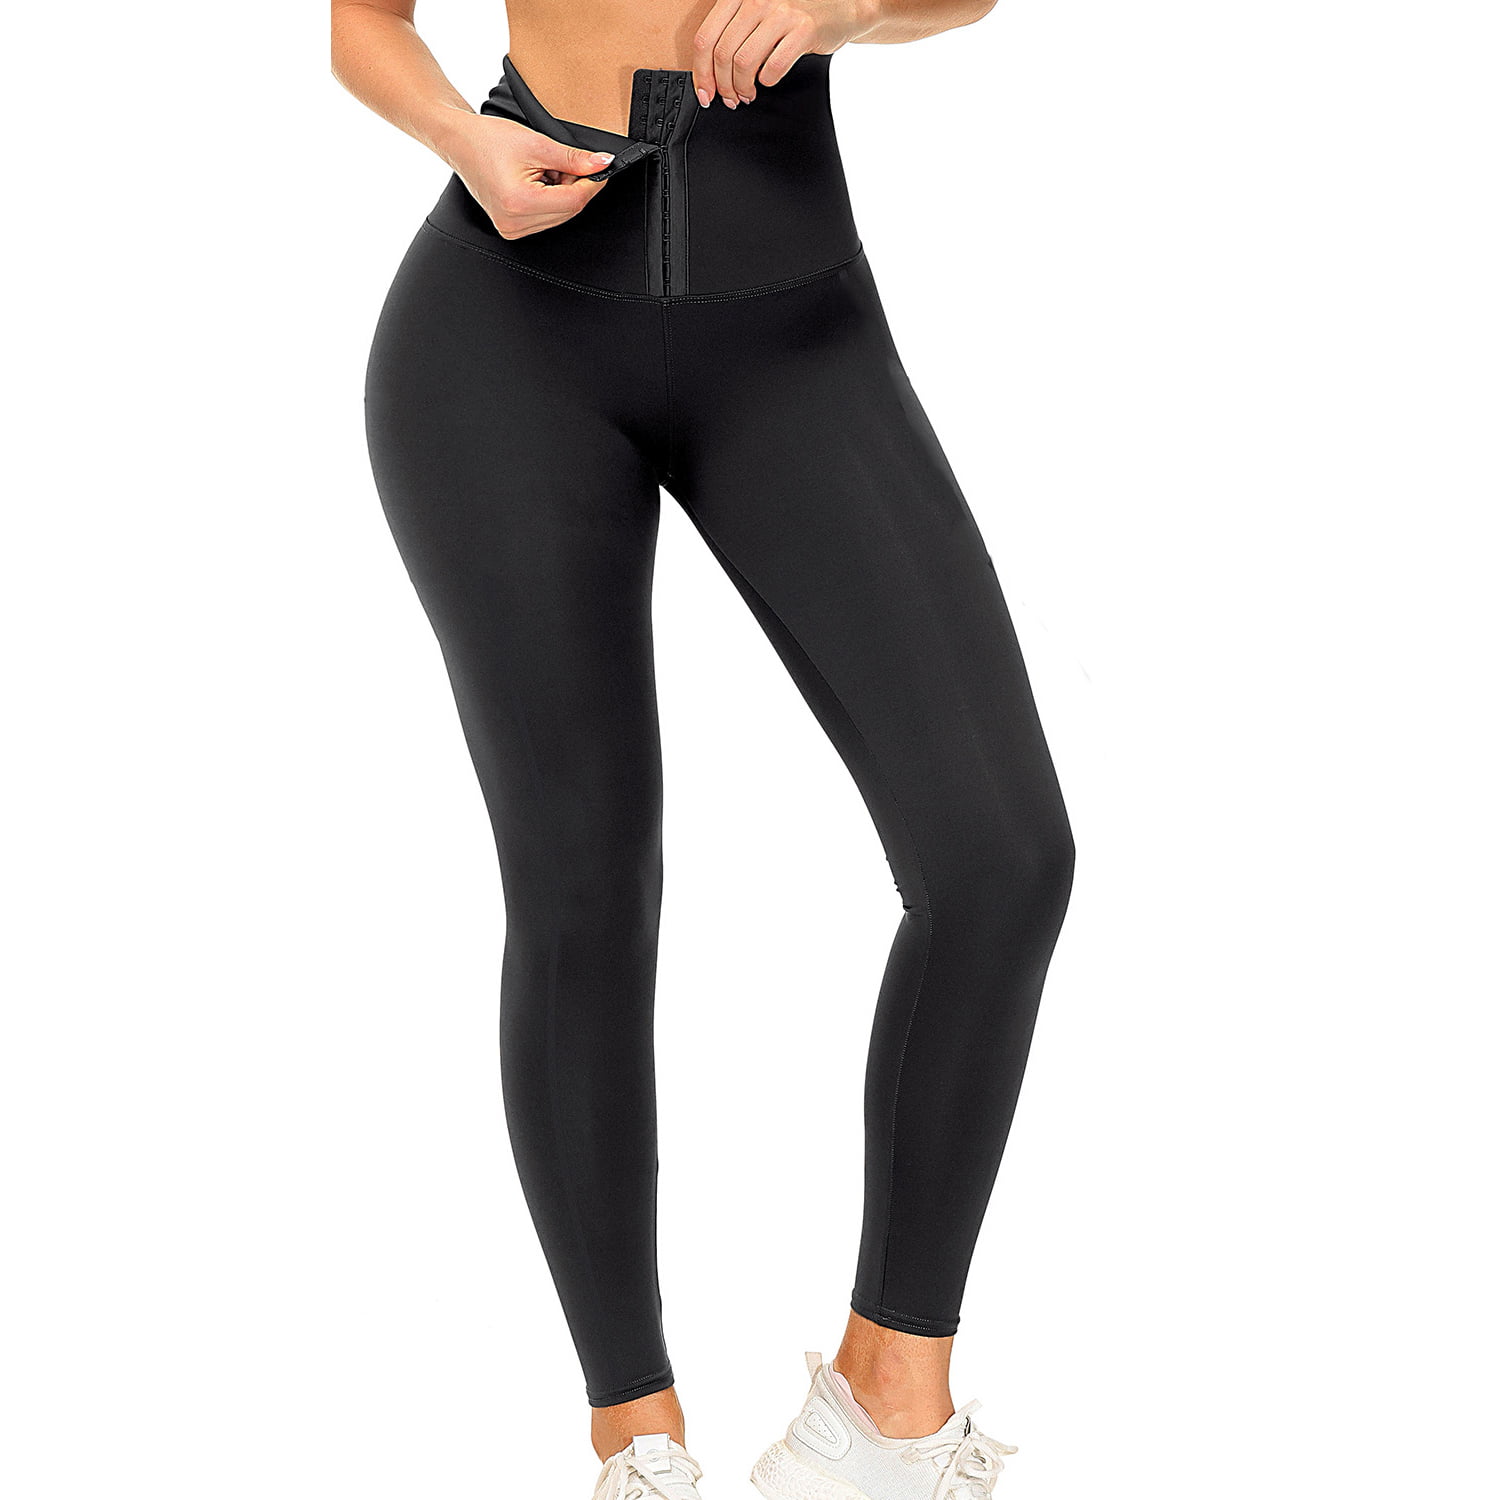 Yoga Pants Women High Waist Gym Leggings Push Up – A Body Fit For A Lord